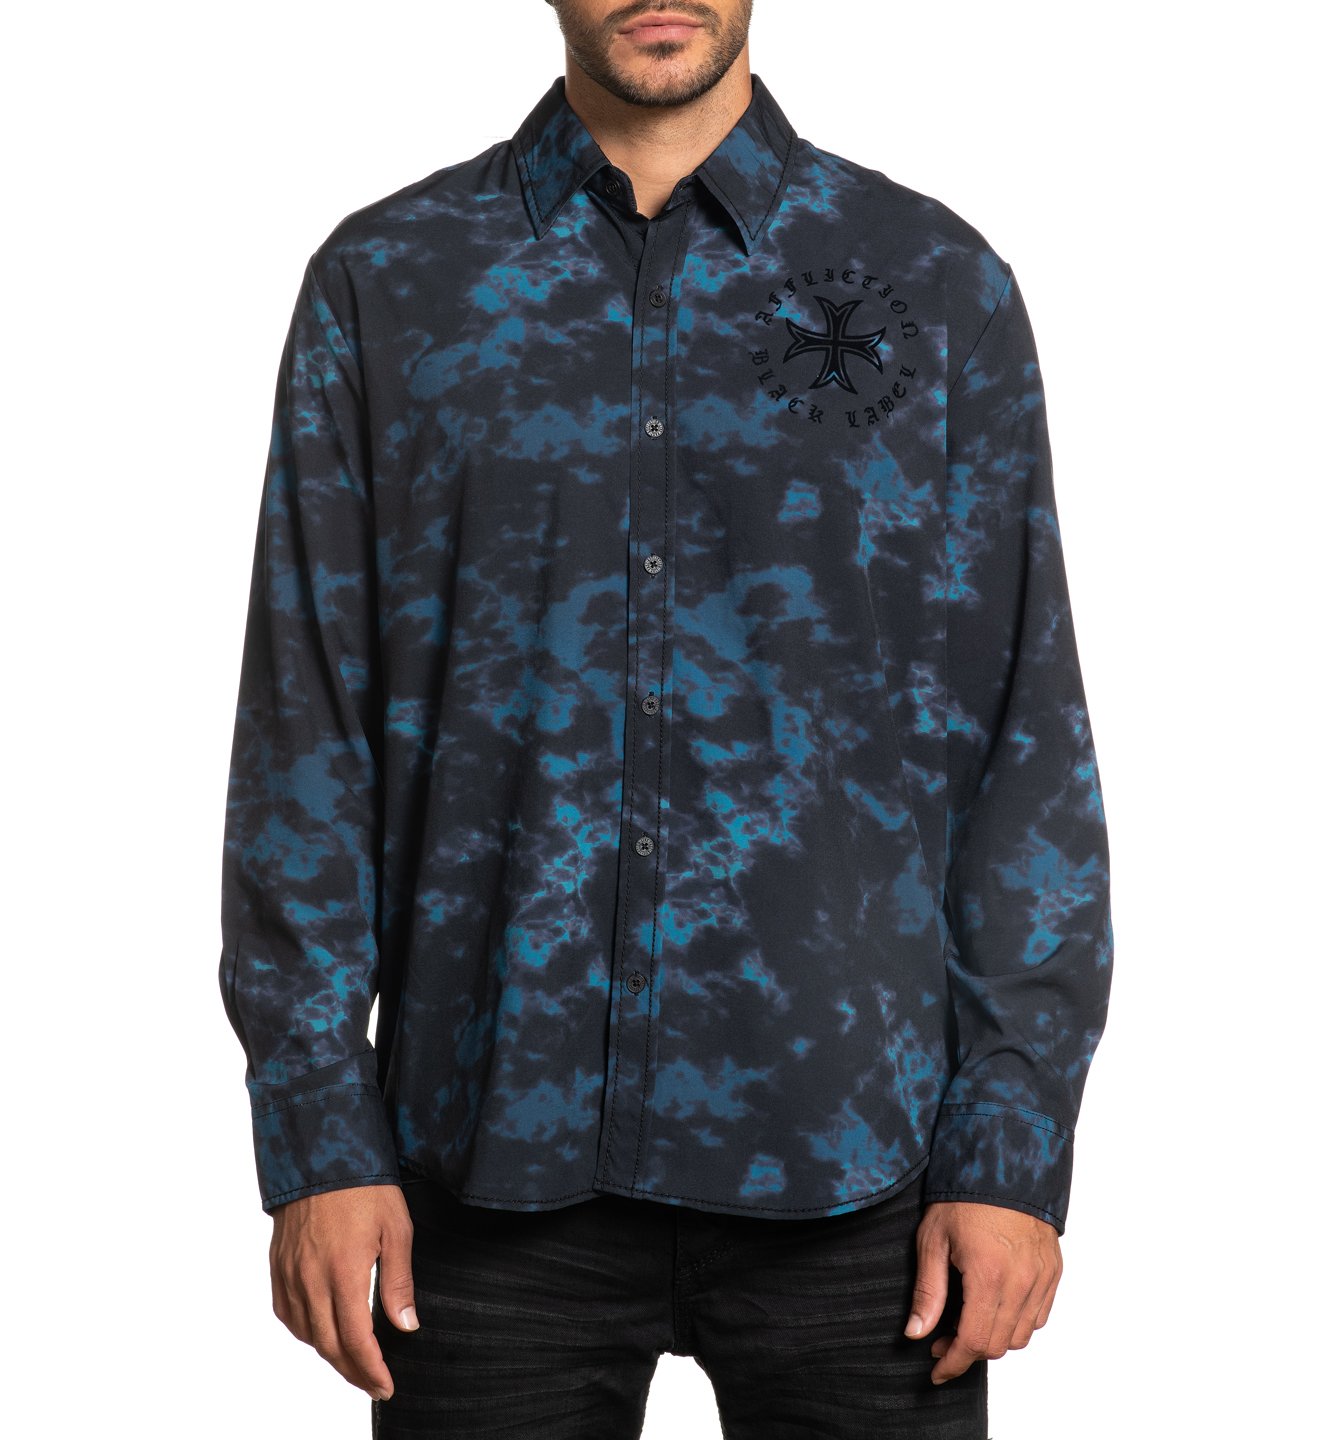 Titan - Mens Button Down Tops - Affliction Clothing